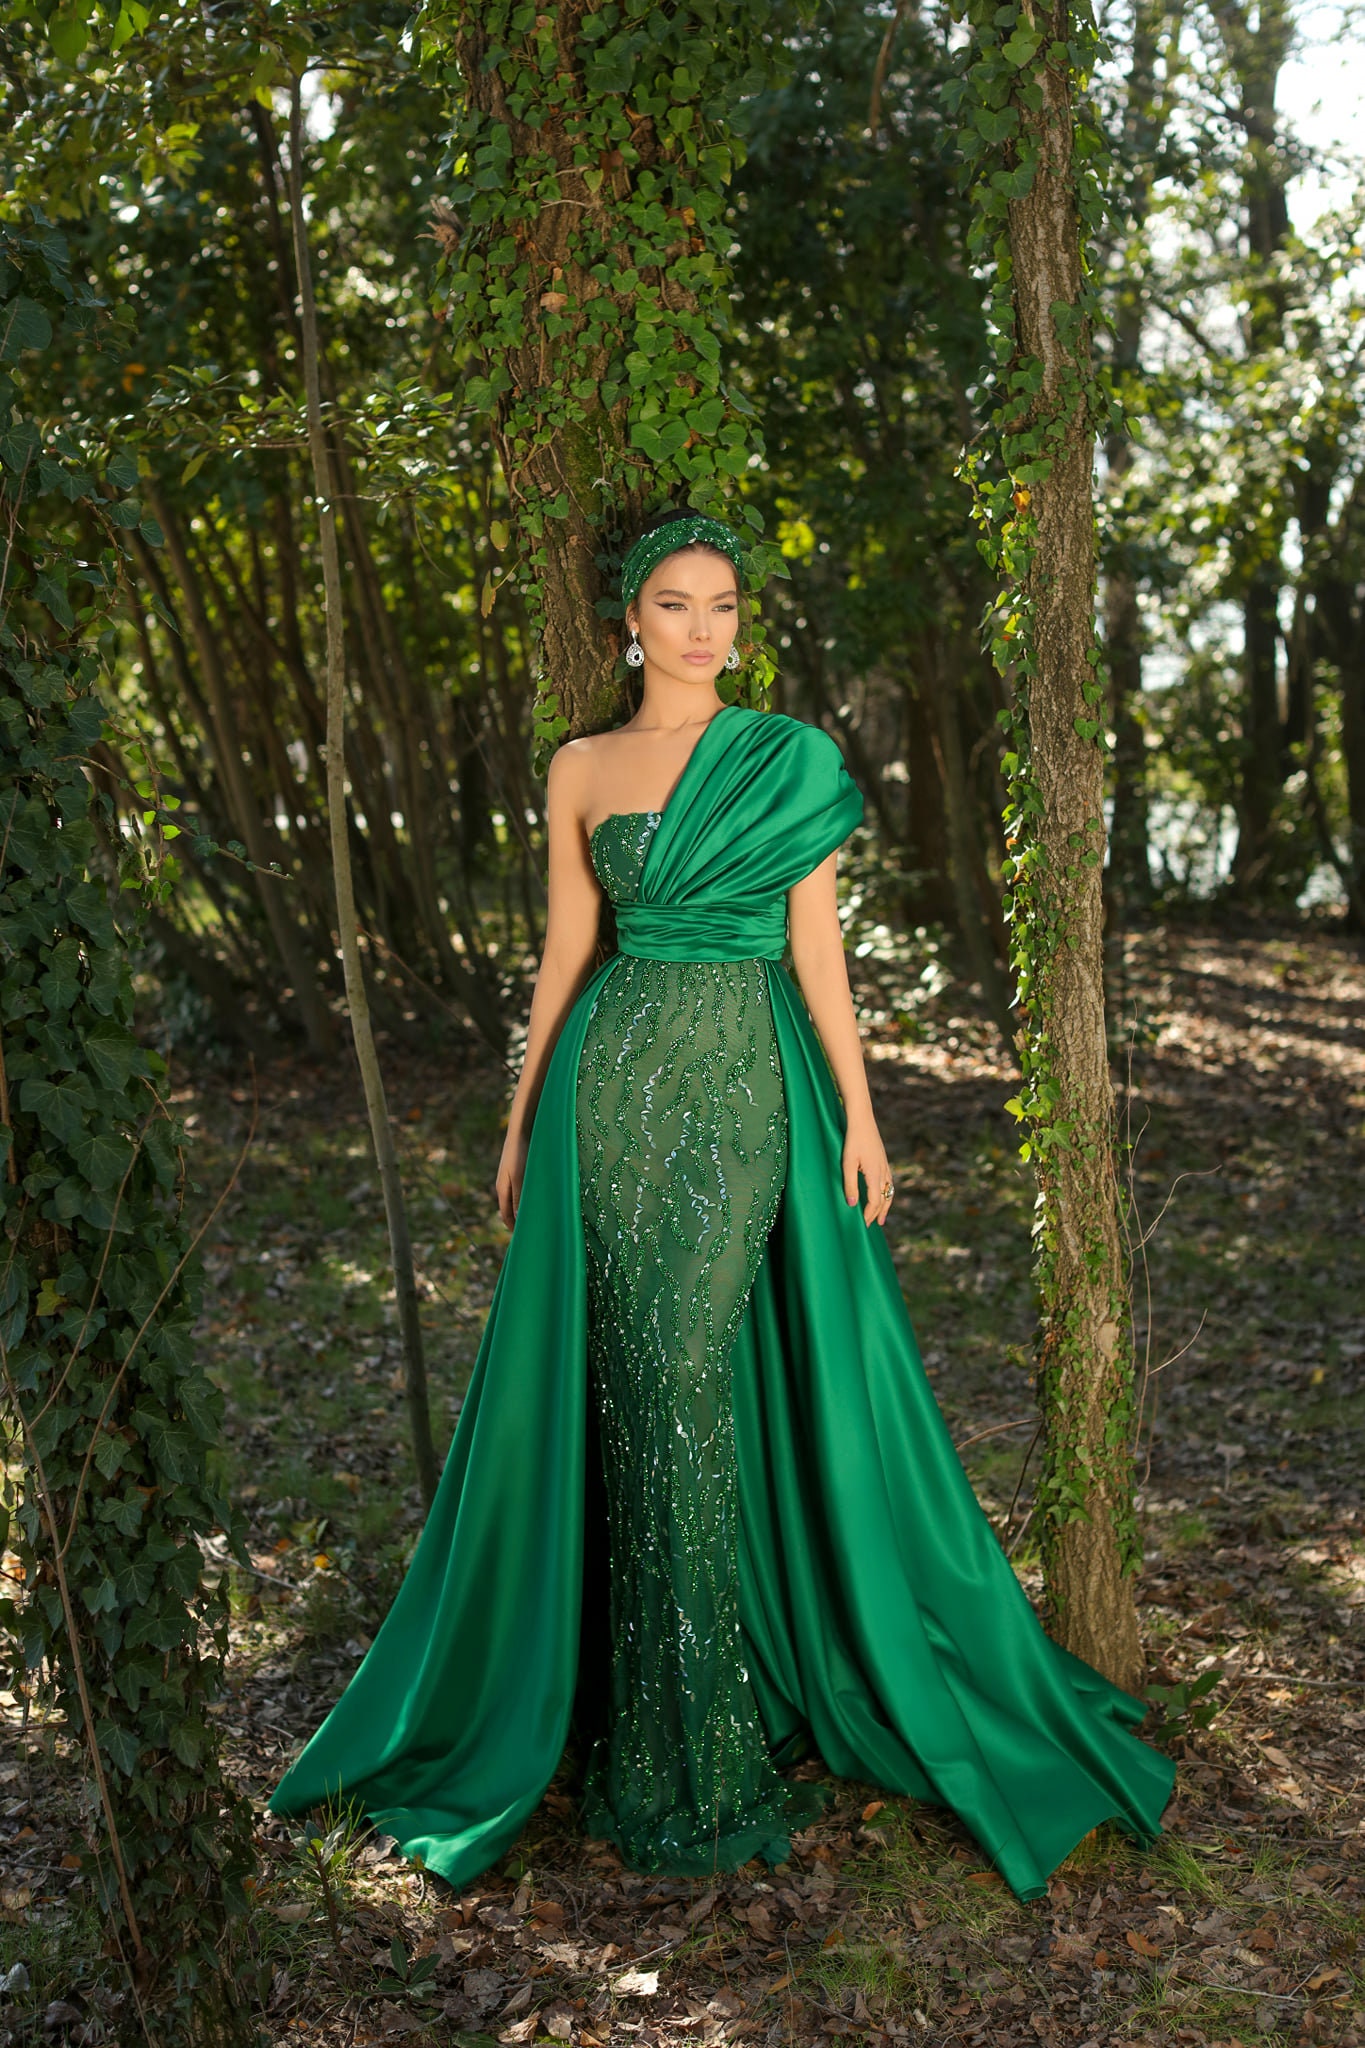 Green Ball Gown Sequins Lace Appliques Off the Shoulder Wedding Dress |  Green ball gown, Green wedding dresses, Ball gowns